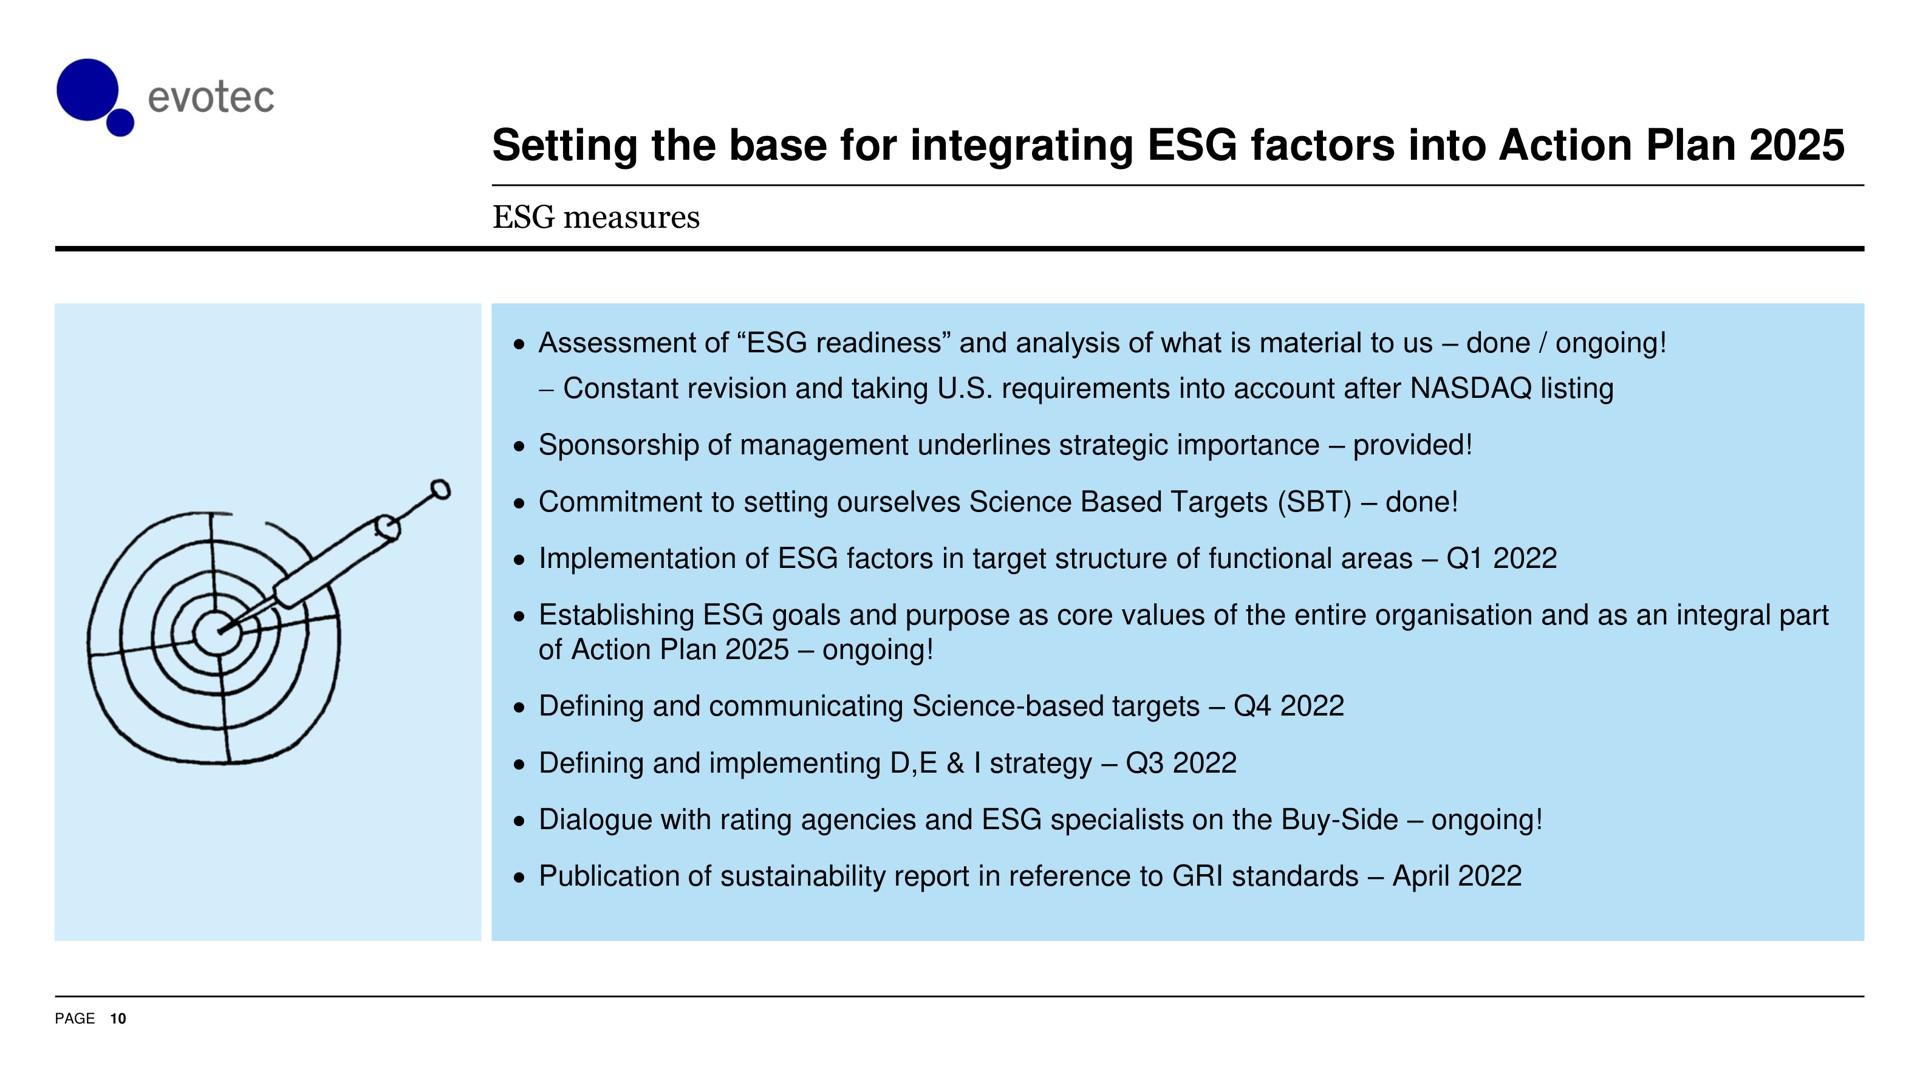 setting the base for integrating factors into action plan | Evotec